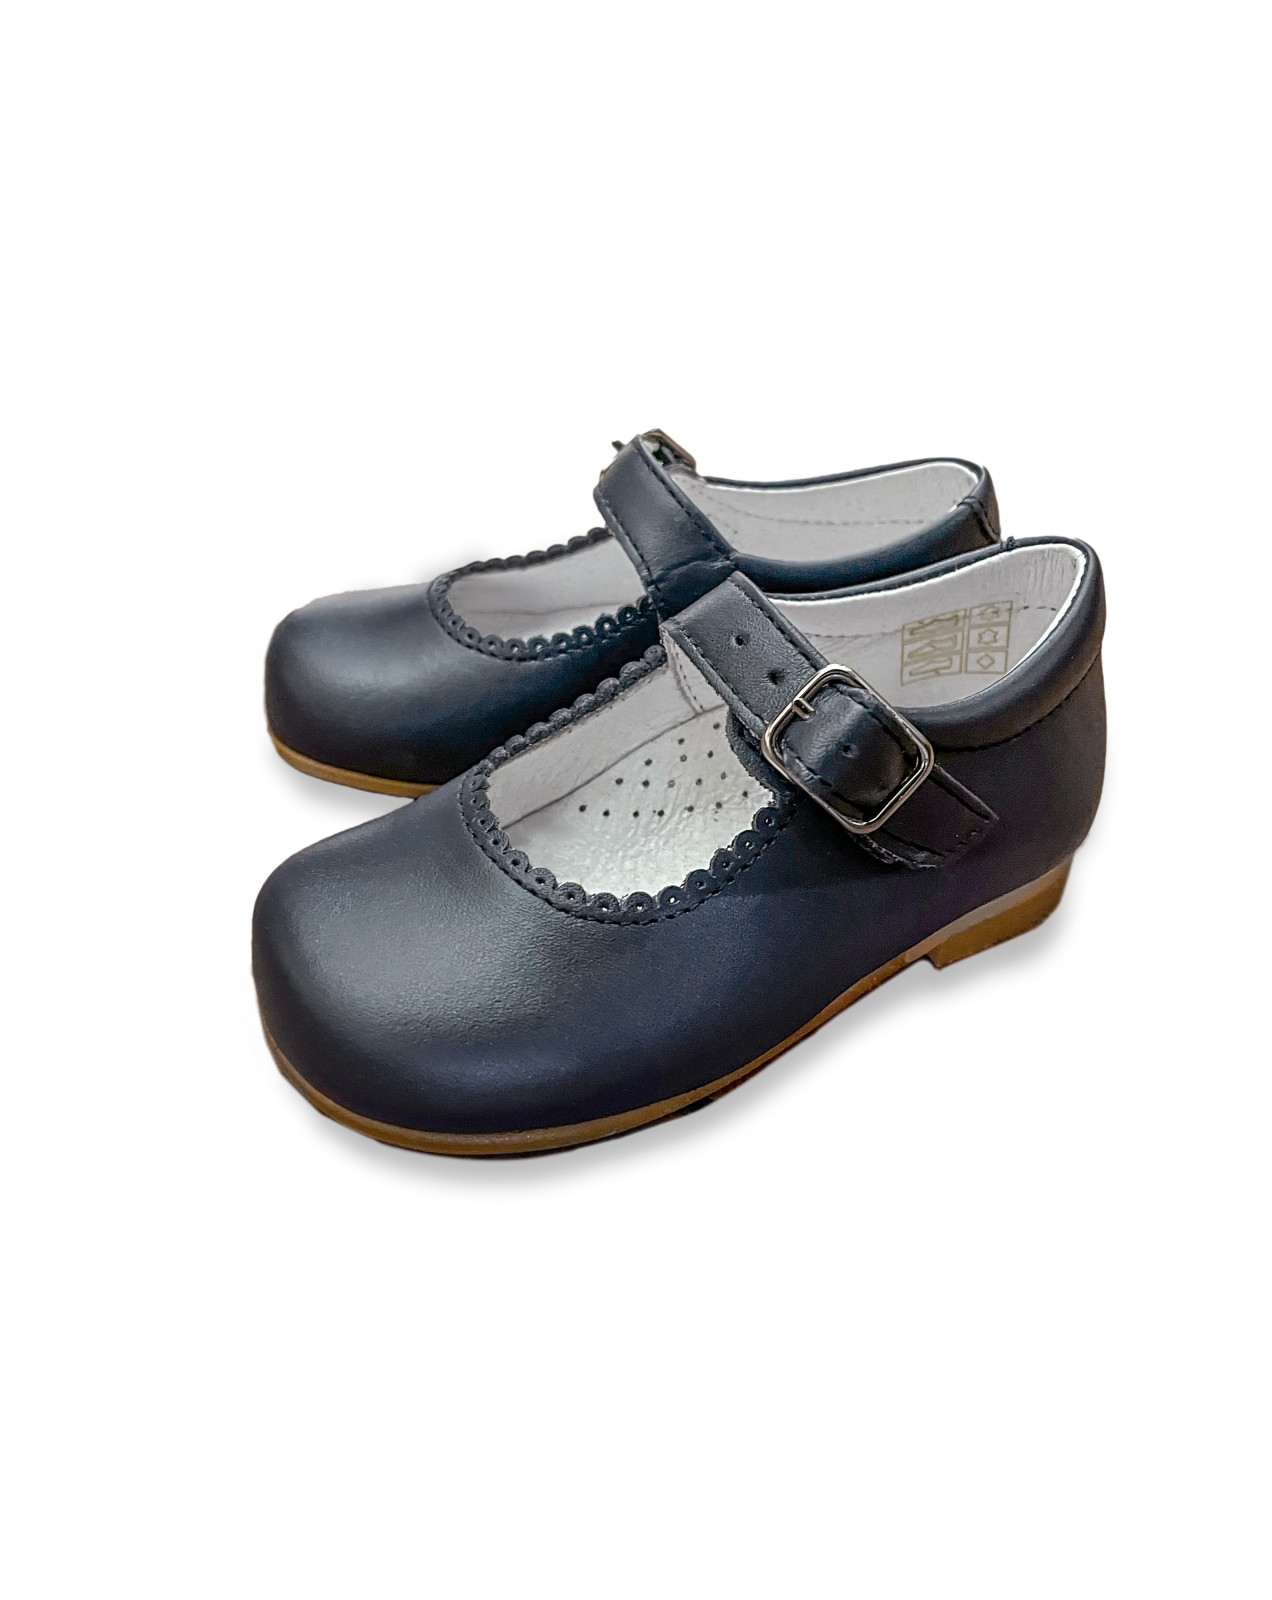 Girl navy blue leather Mary Jane  shoes, hand made worked